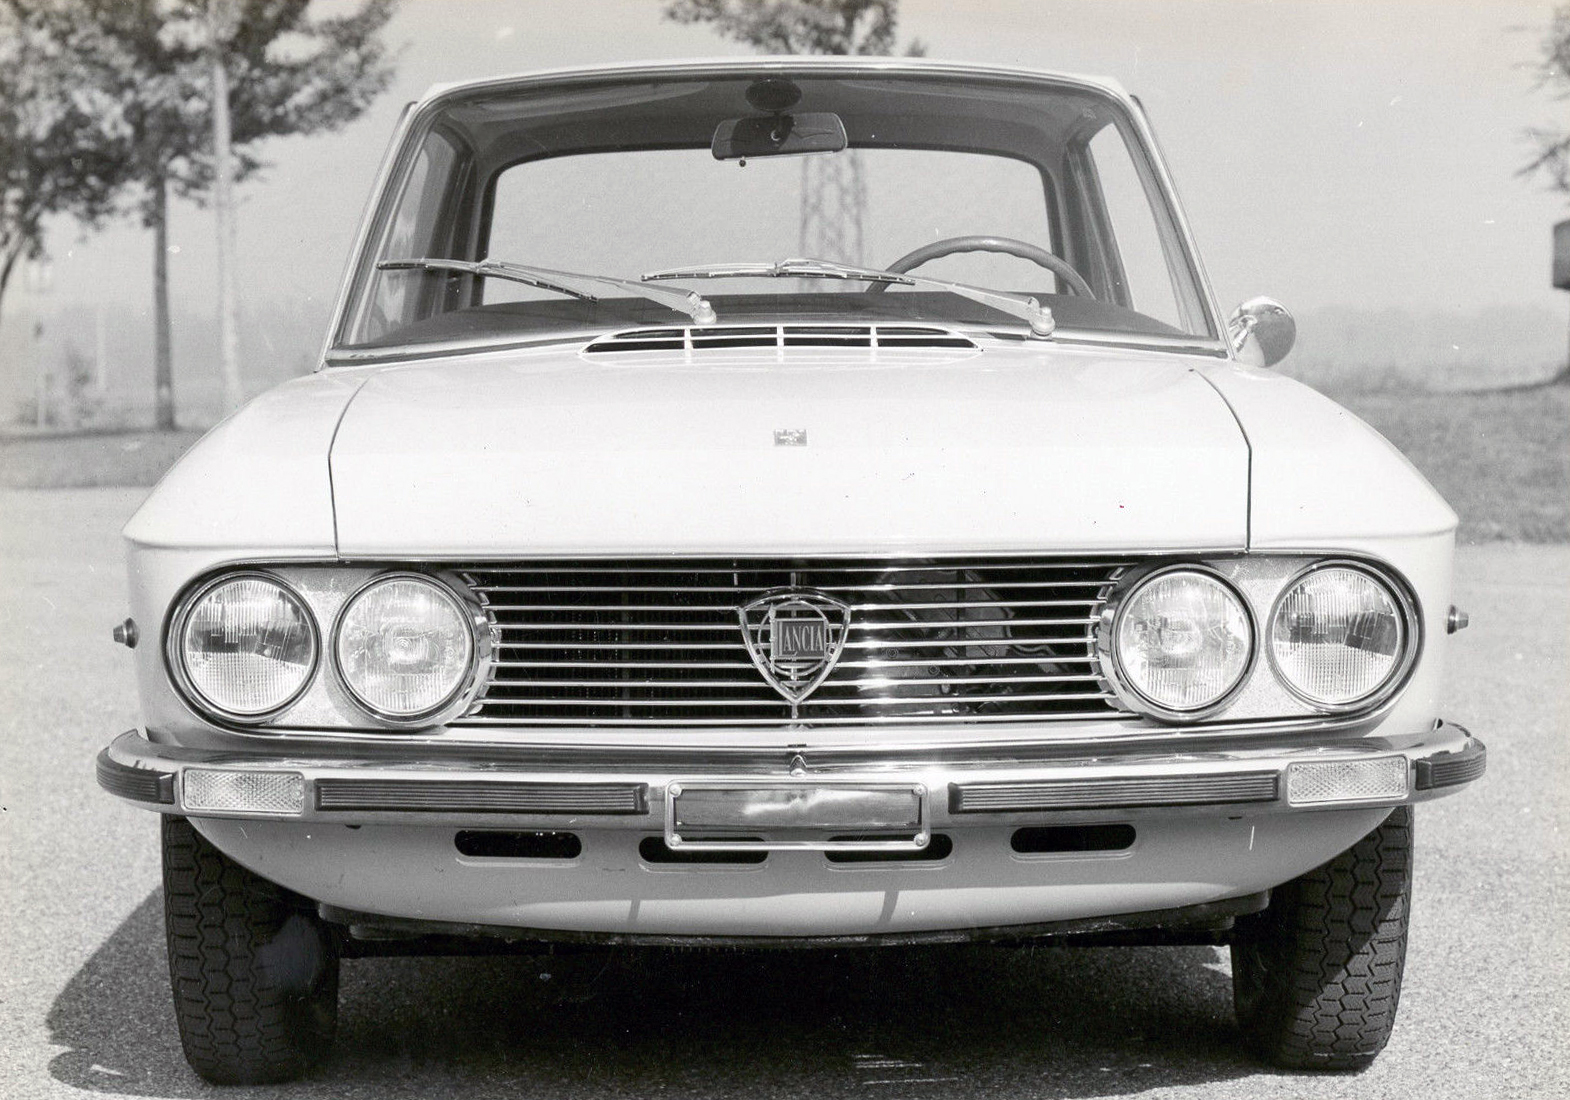 Lancia Fulvia Coupe 1.3S 2nd Series, 1970